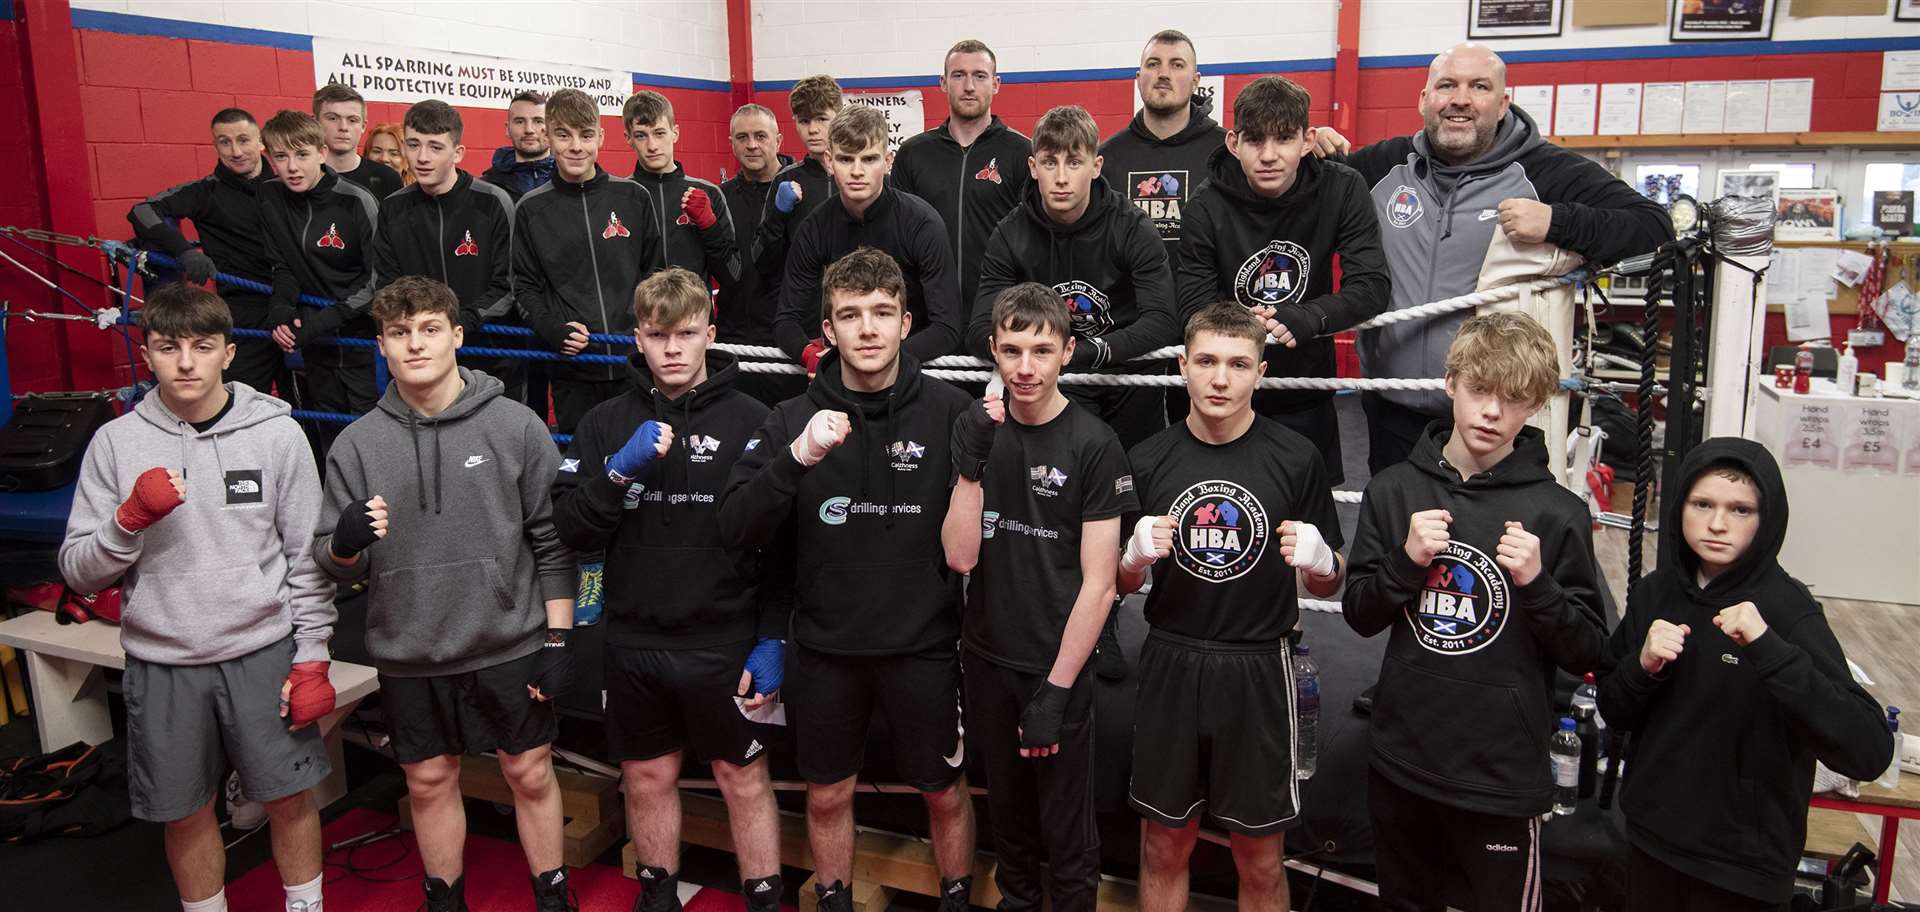 Caithness Boxing Club members who took part in sparring with Inverness and Fort William clubs. Front, from left: Kian Young, Nathan Tait, Bobby Crompton, Kieran Hourston and Alex Curlis. Picture: Iain Ferguson / The Write Image